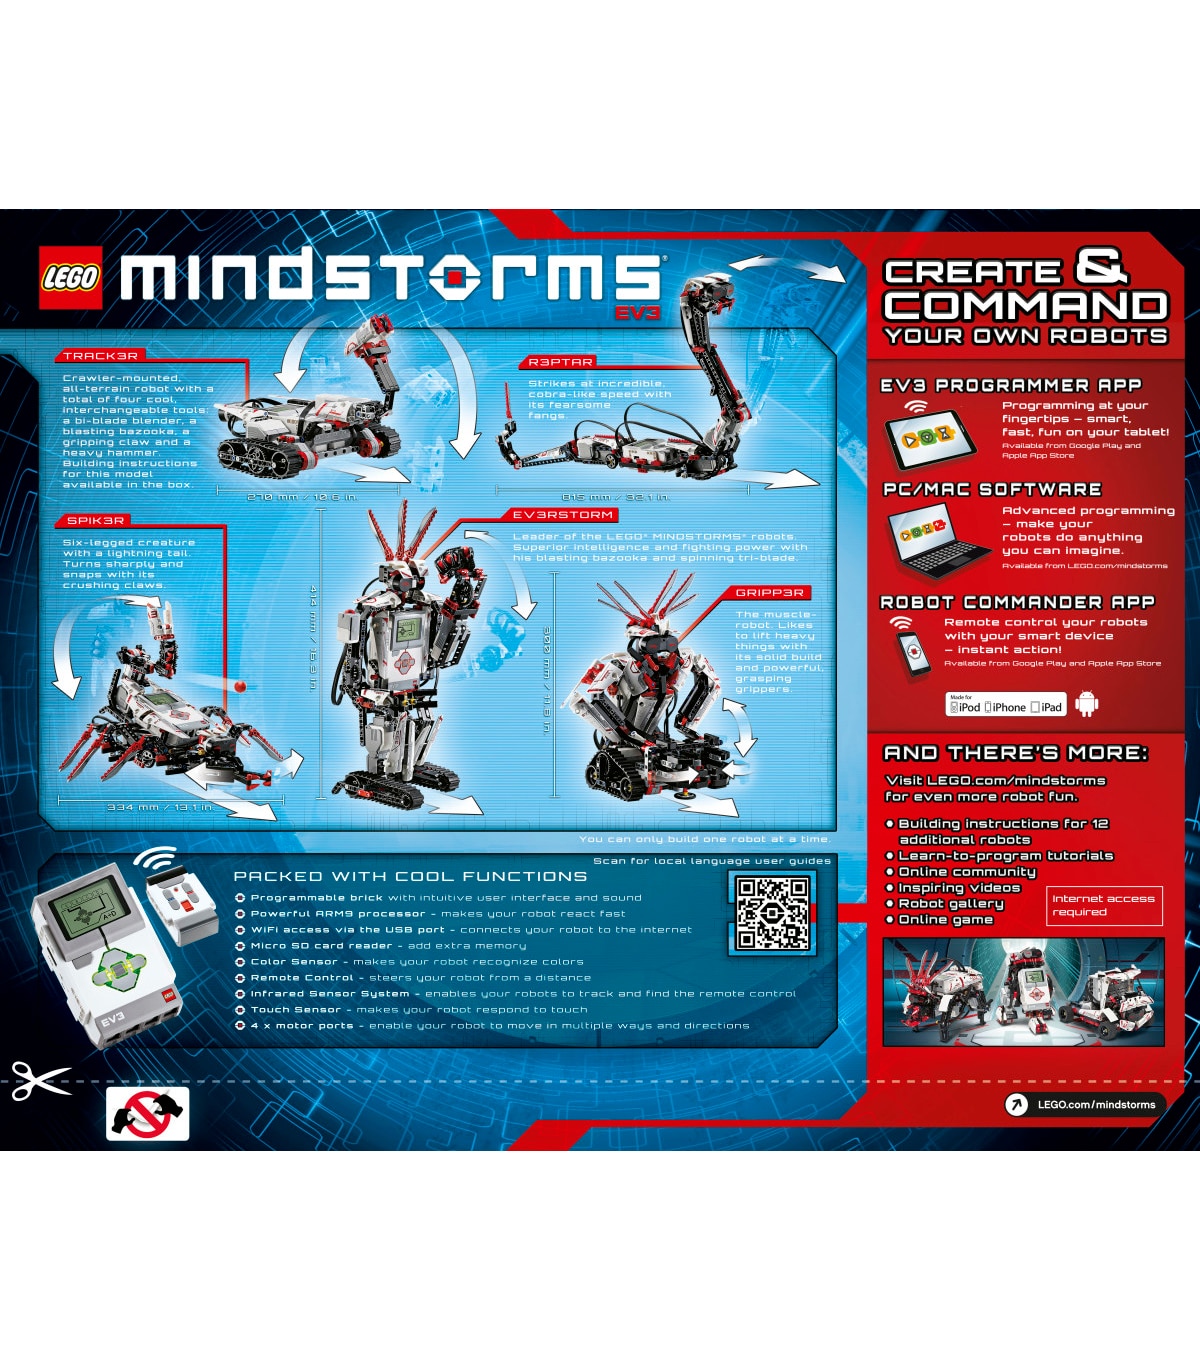 remote control of a lego mindstorms robot over the internet